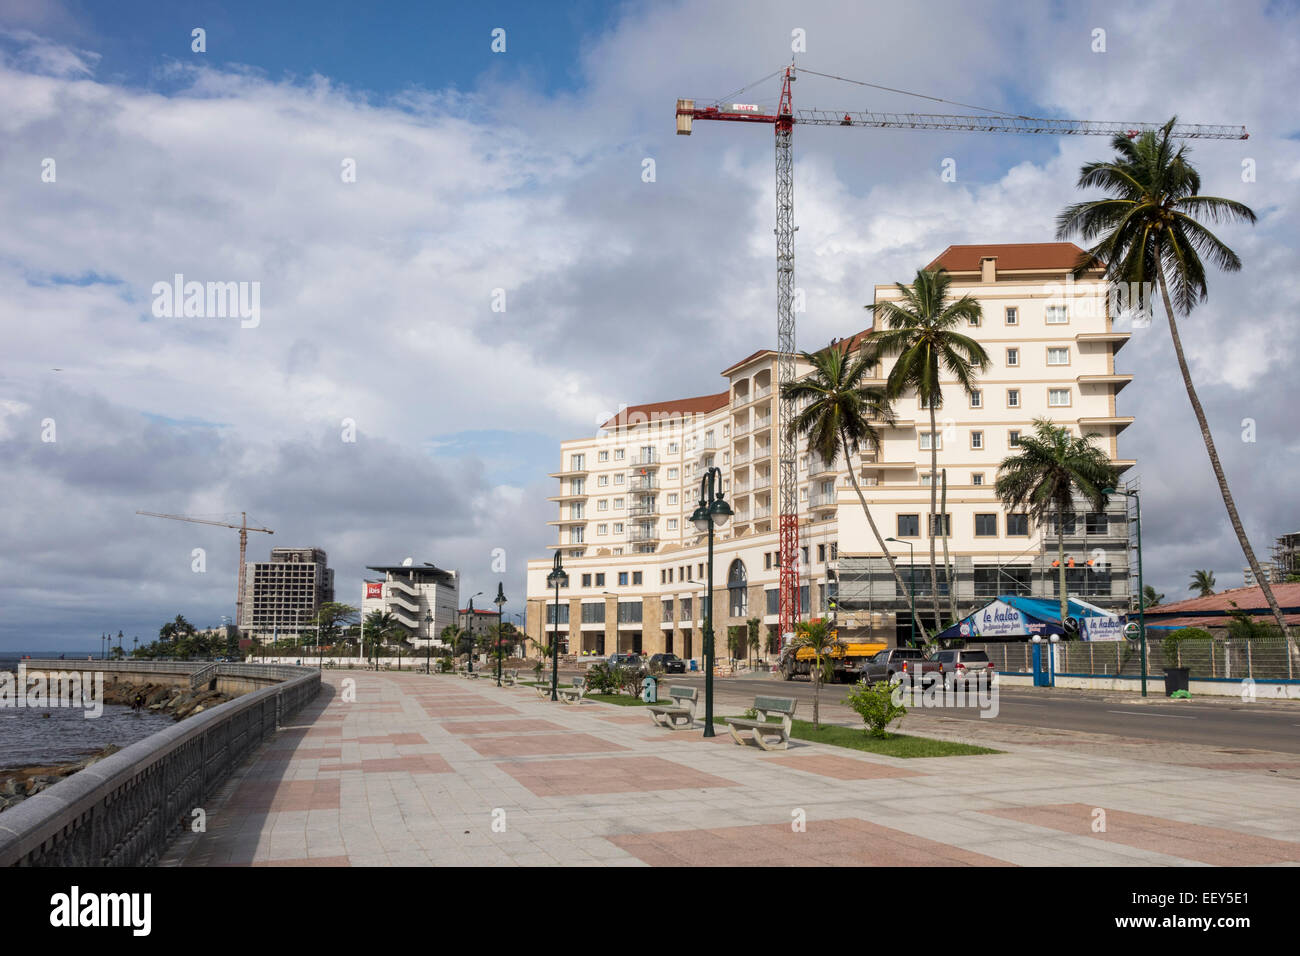 Building exterior of large new apartment or hotel building under construction in Bata, Equatorial Guinea, Africa Stock Photo